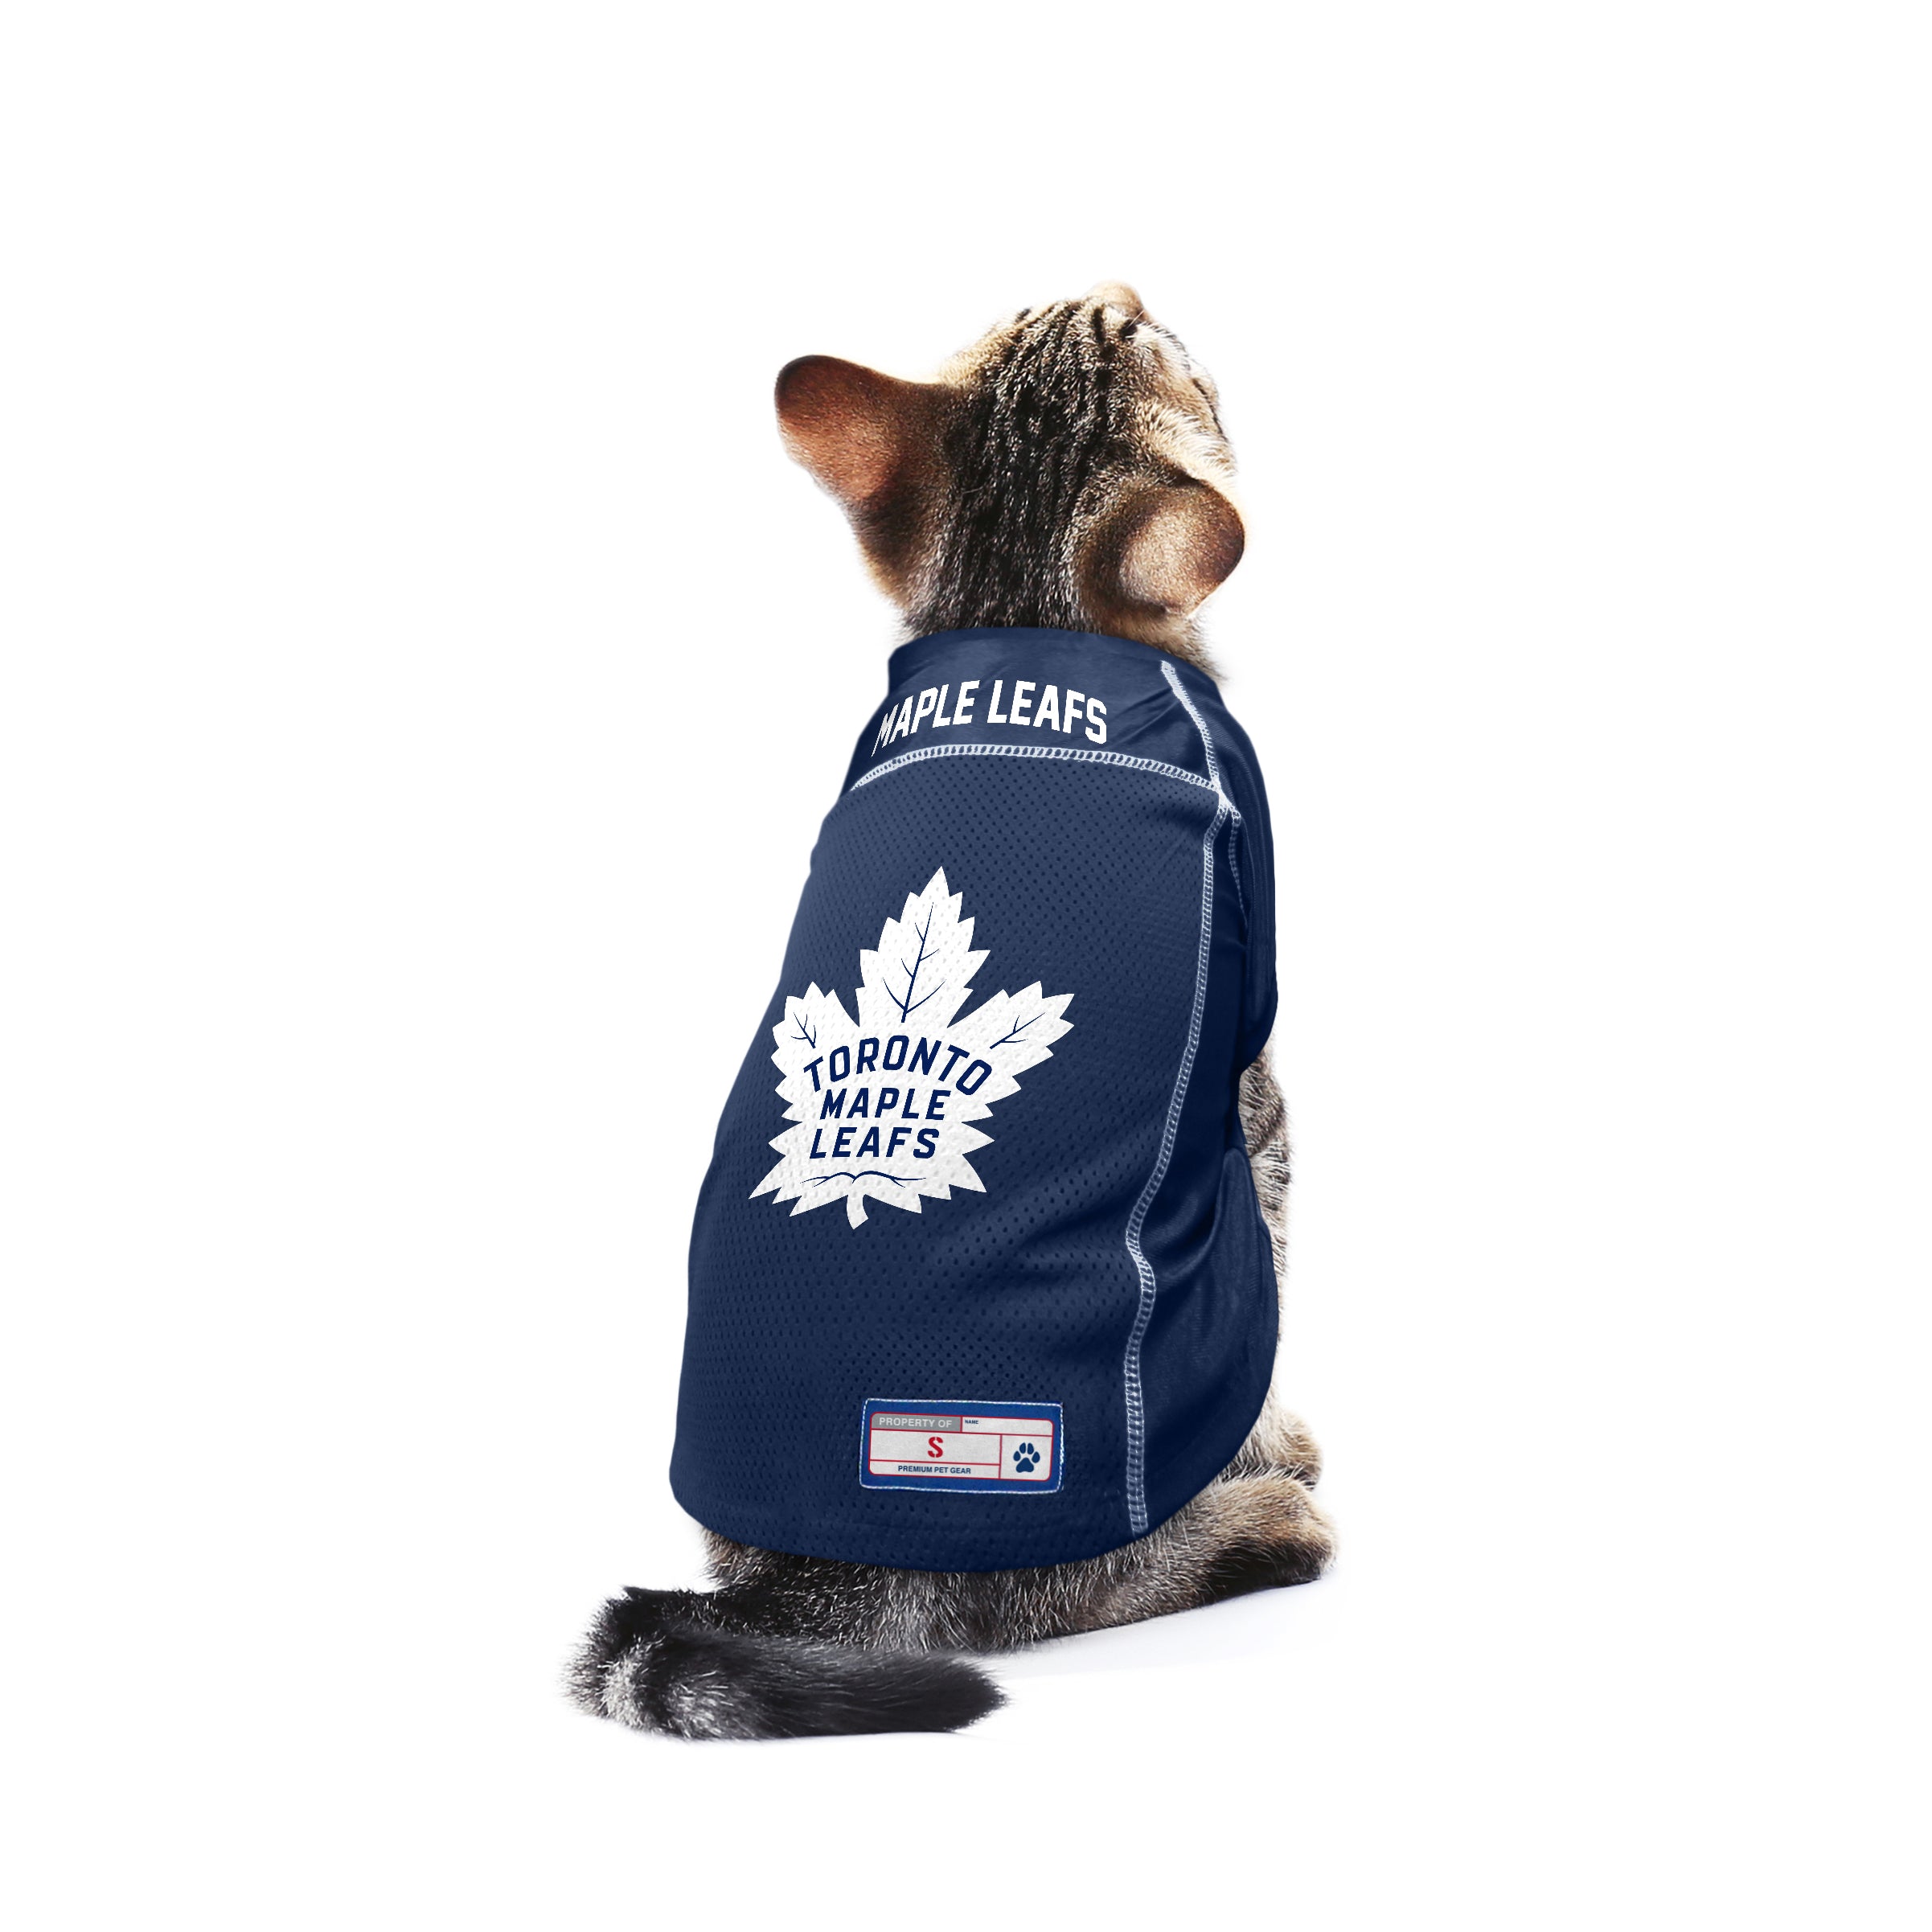 Just in!! Toronto Maple Leaf Pet Jerseys!!! Come in to our store located in  the heart of downtown Owen Sound or place your order today…